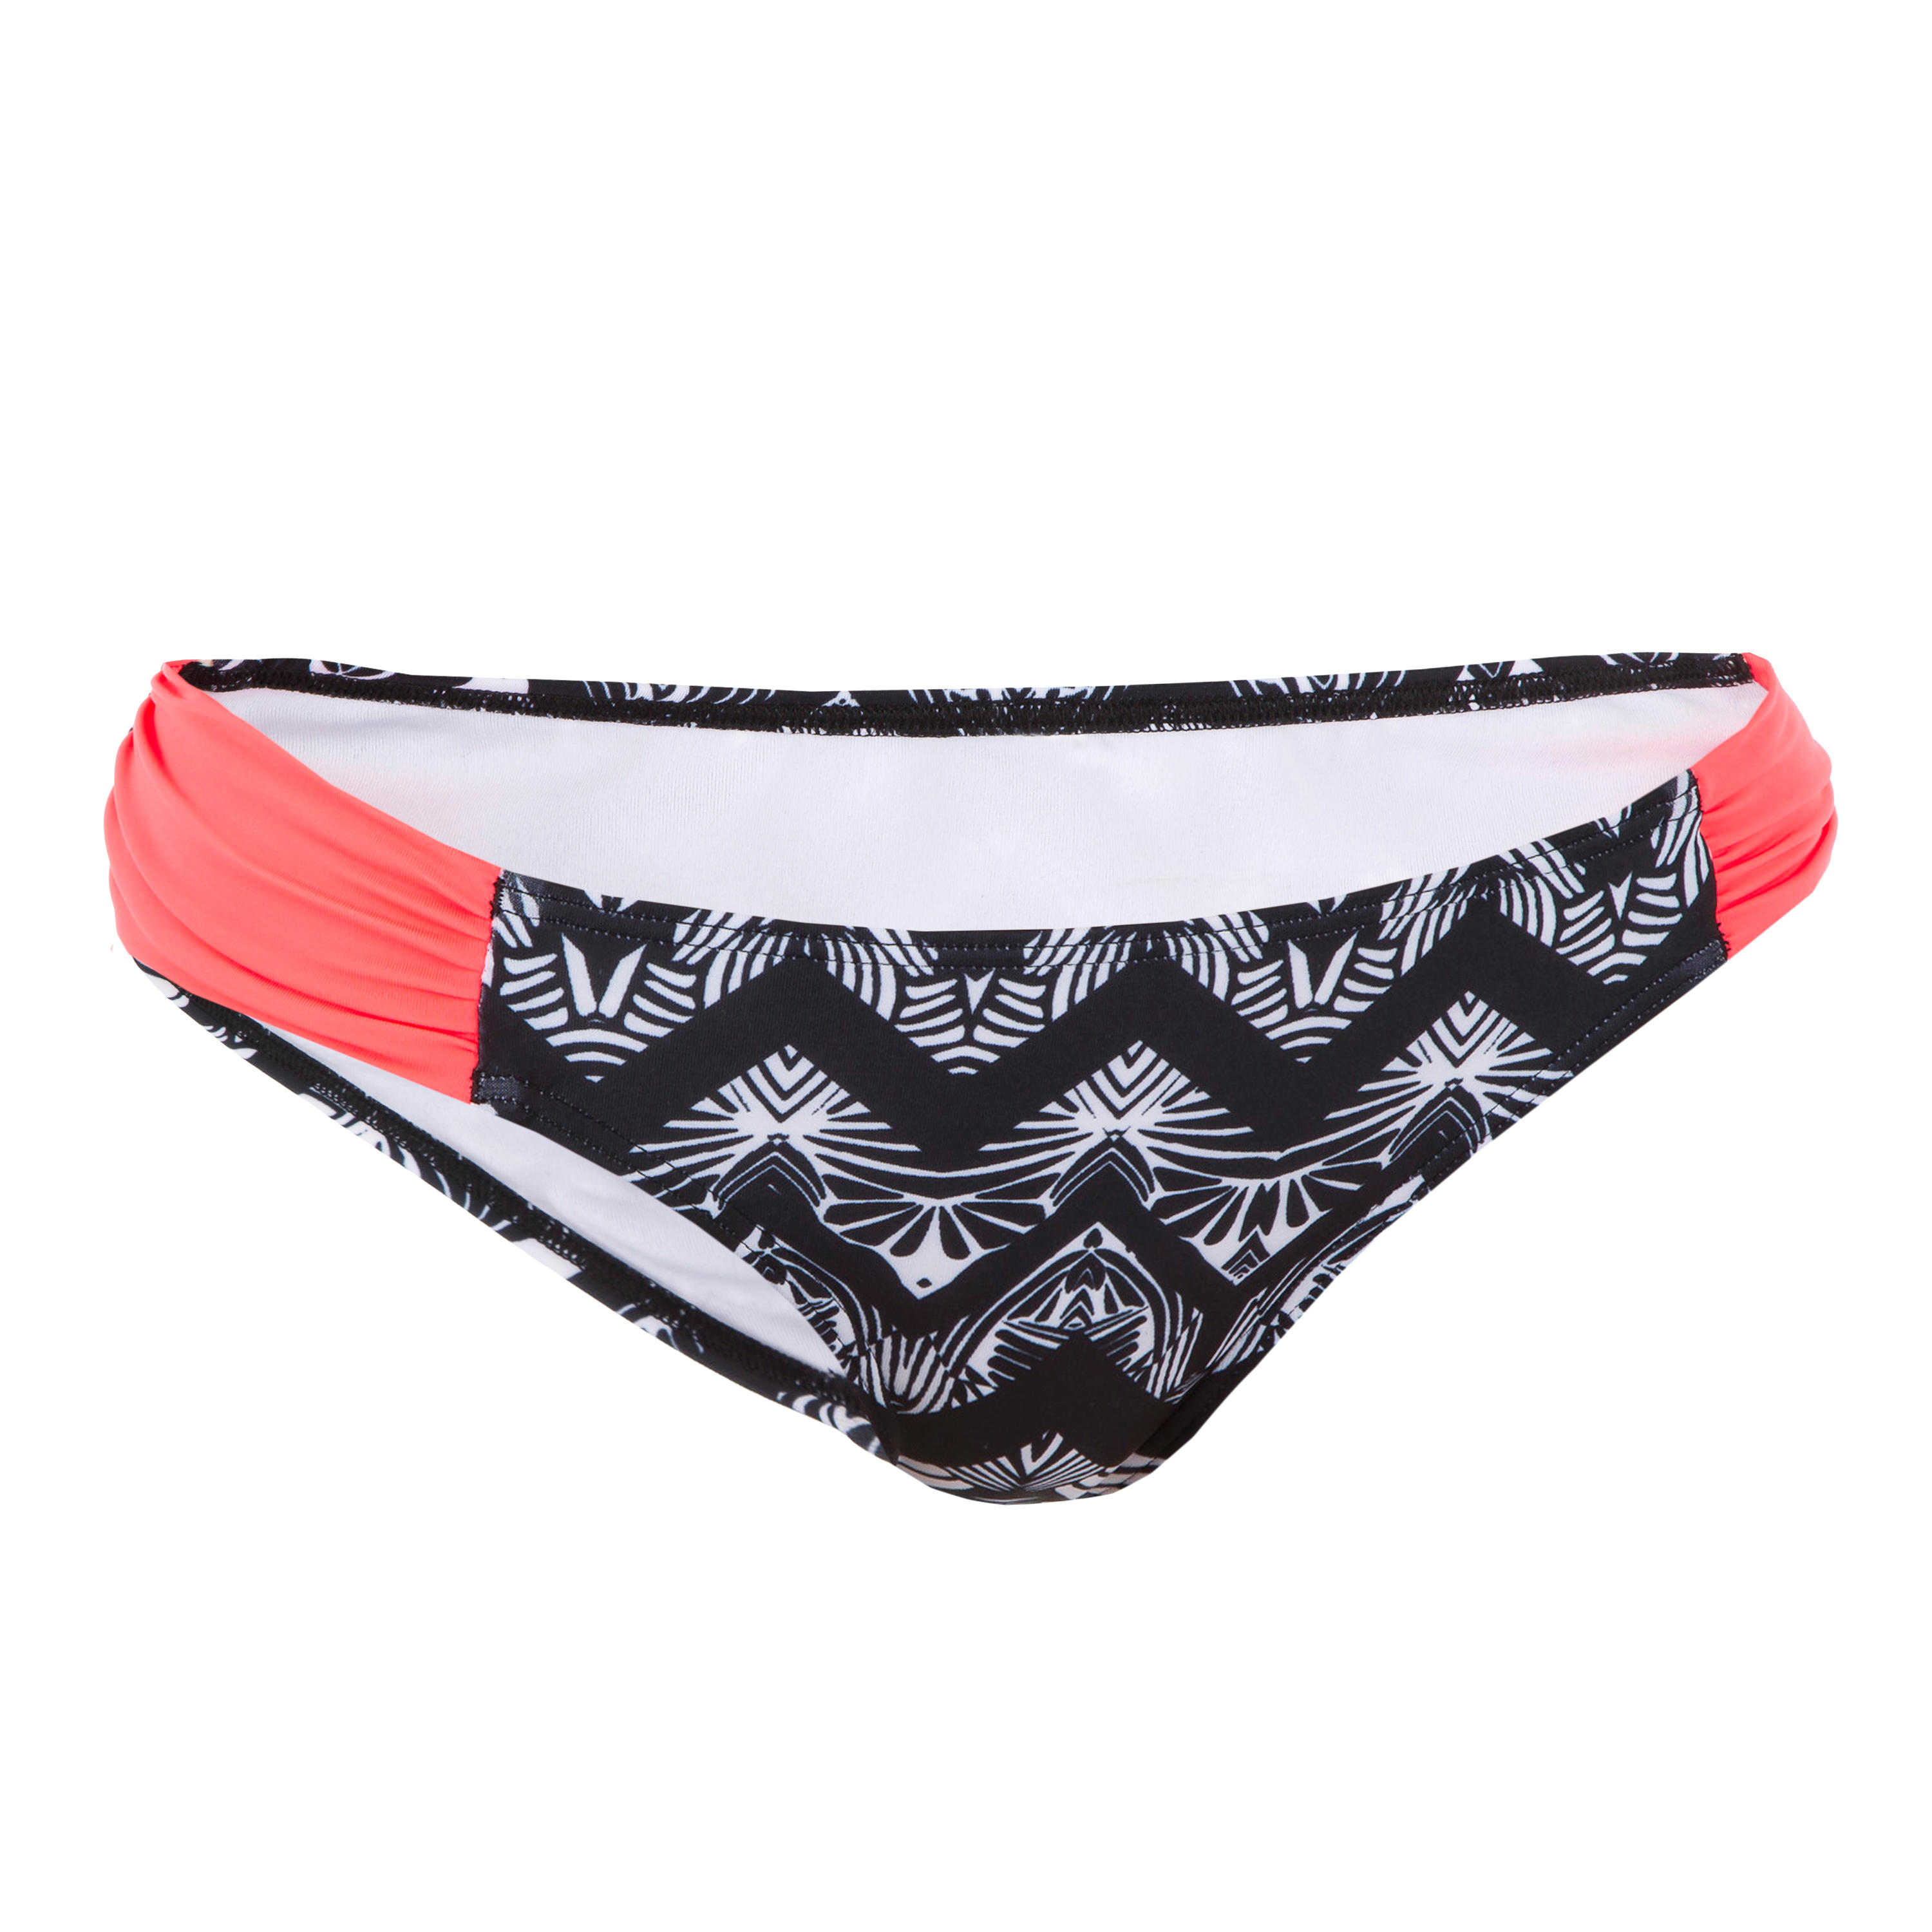 Women's surfing swimsuit bottoms with gathering at the sides NIKI MAWA 1/11